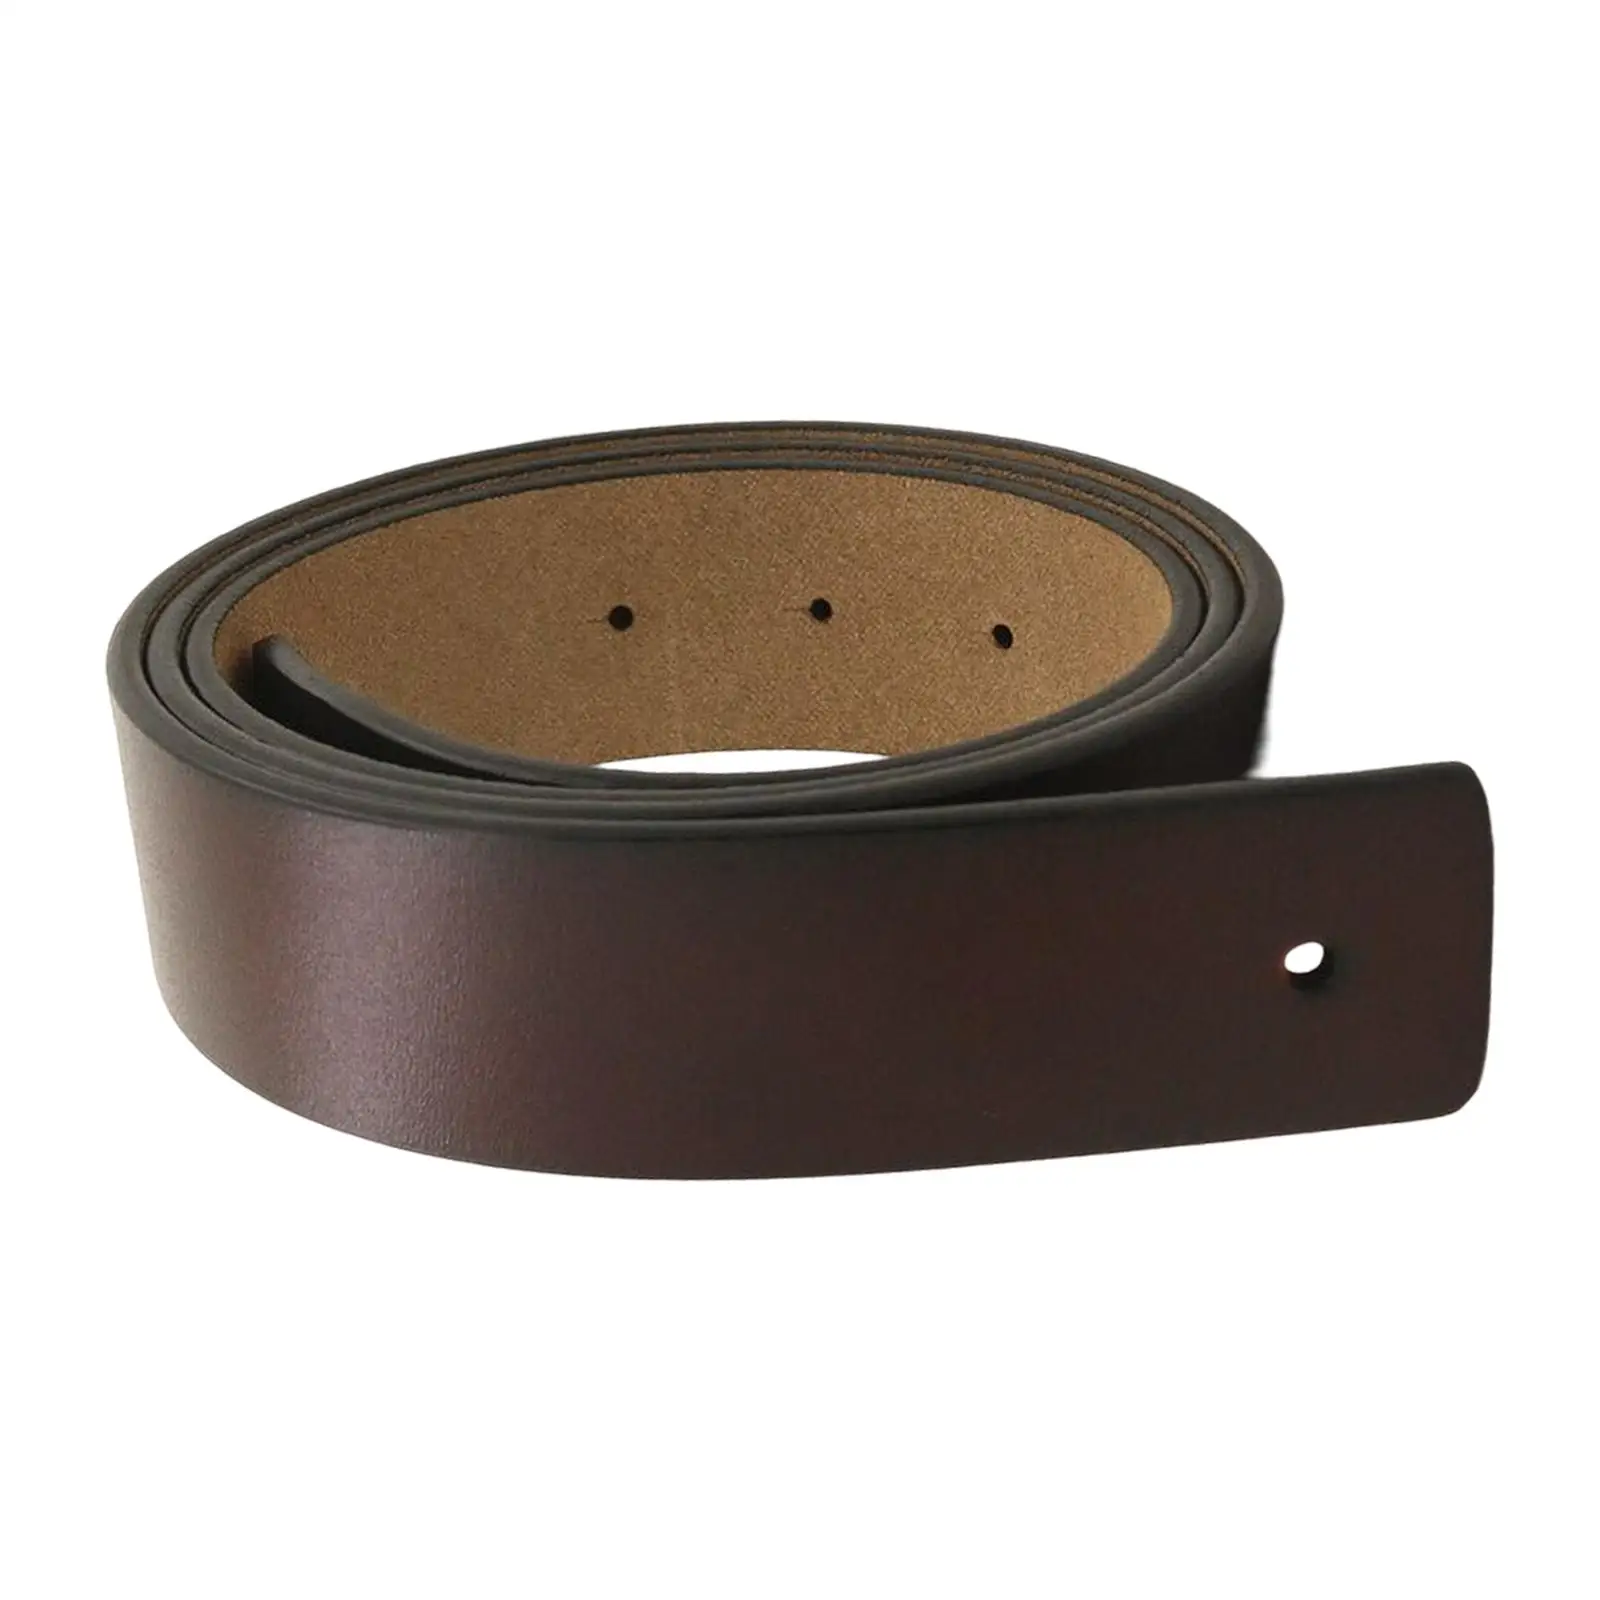 Retro PU Leather Men Belts Without Automatic Buckle Casual Dress Belts Decorative Male Waist Belt for Shorts Party Supplies